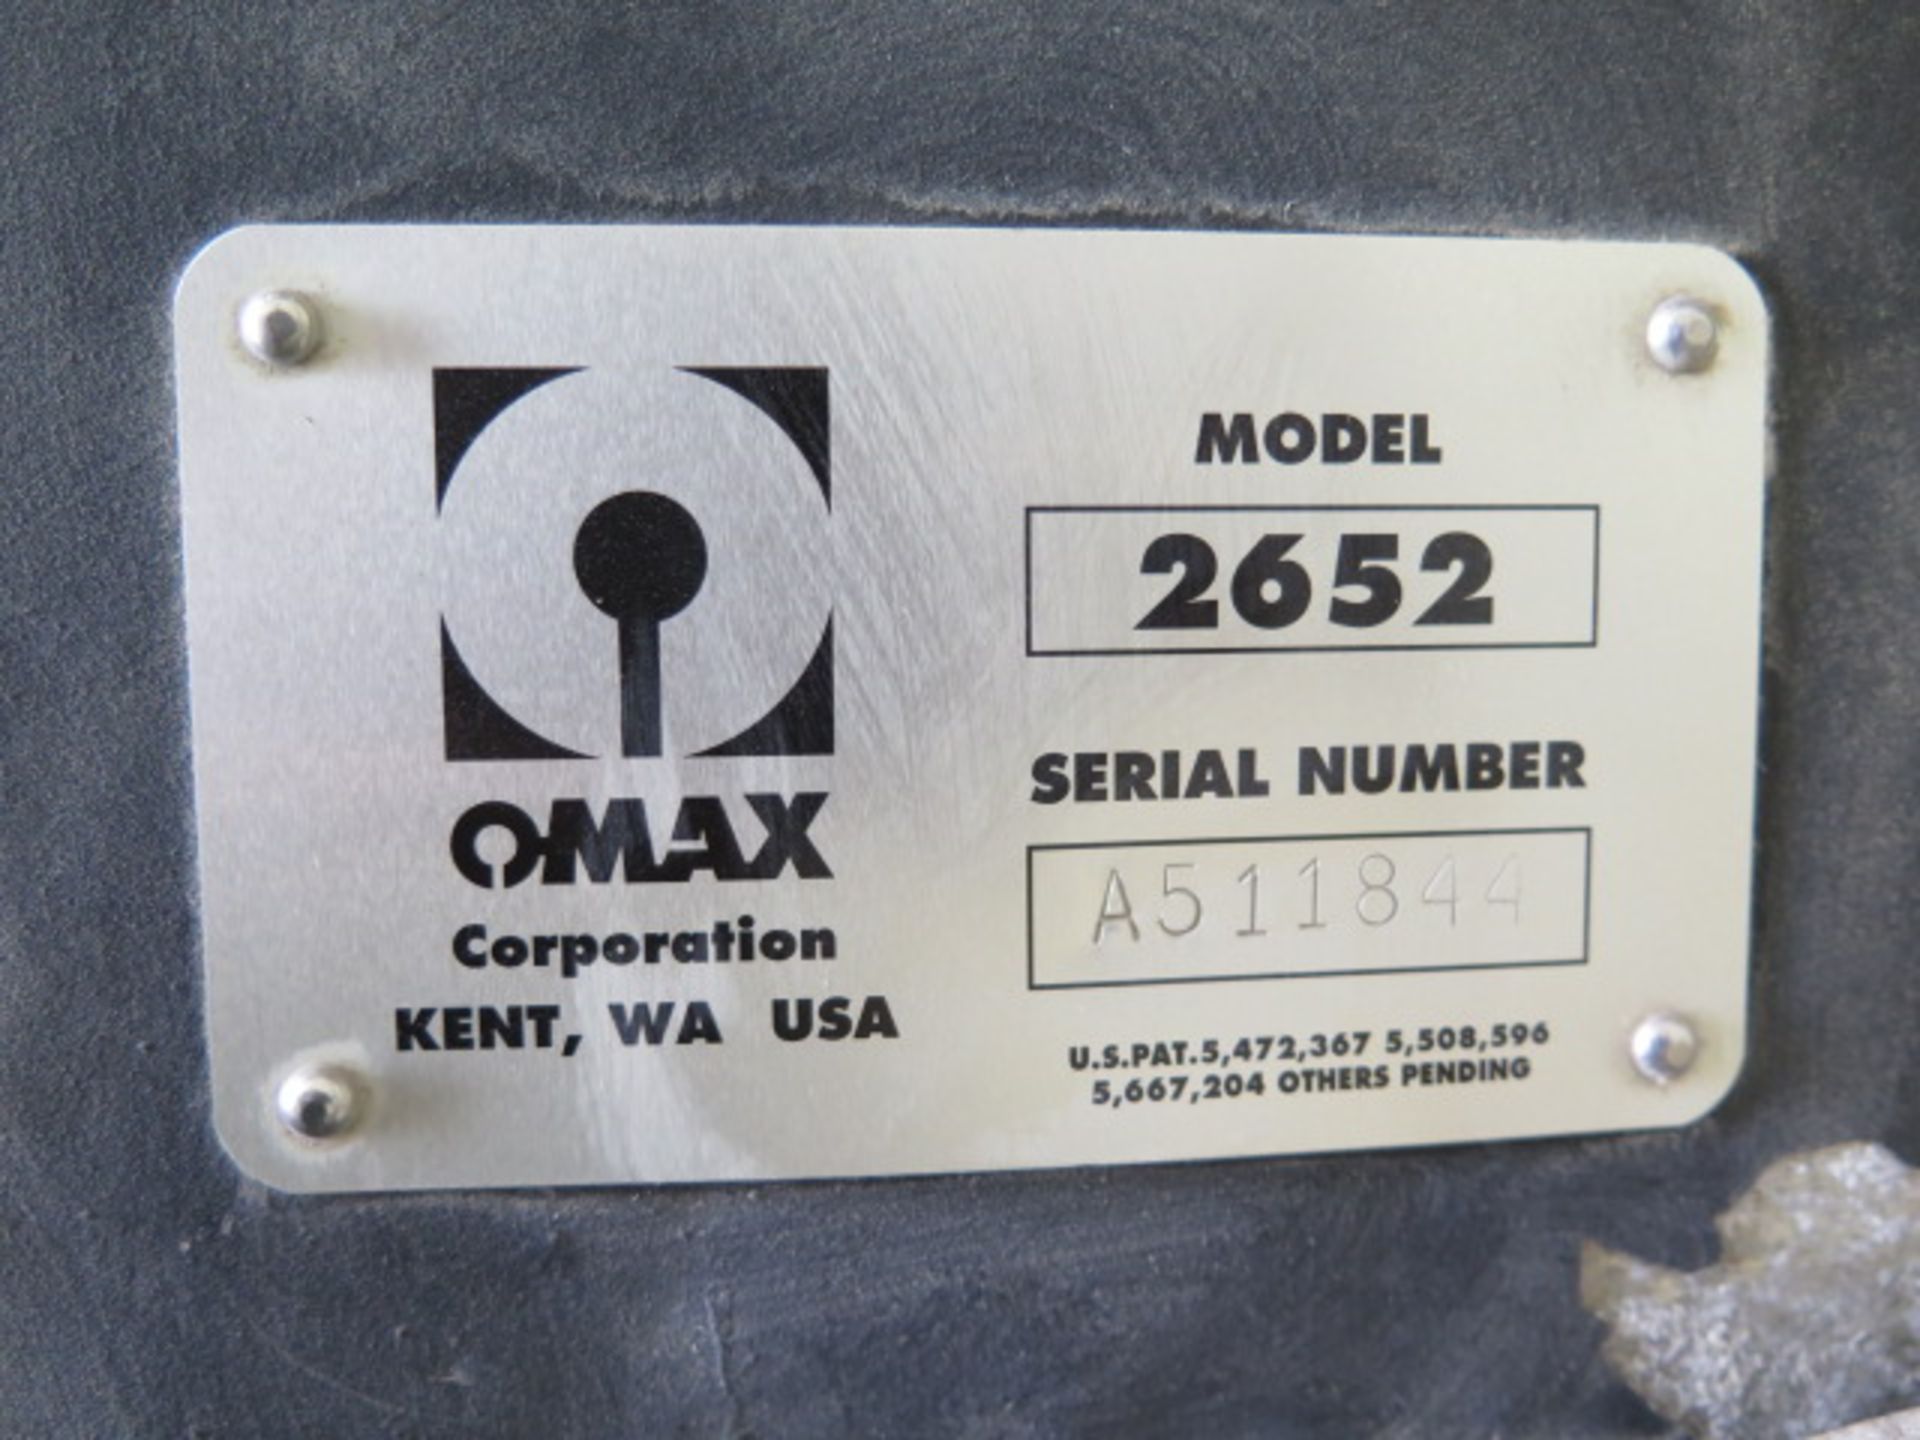 Omax mdl. 2652 2’ x 4’ CNC WaterJet Machine s/n B511824 w/ Omax MAKE Precision Velocity, SOLD AS IS - Image 17 of 17